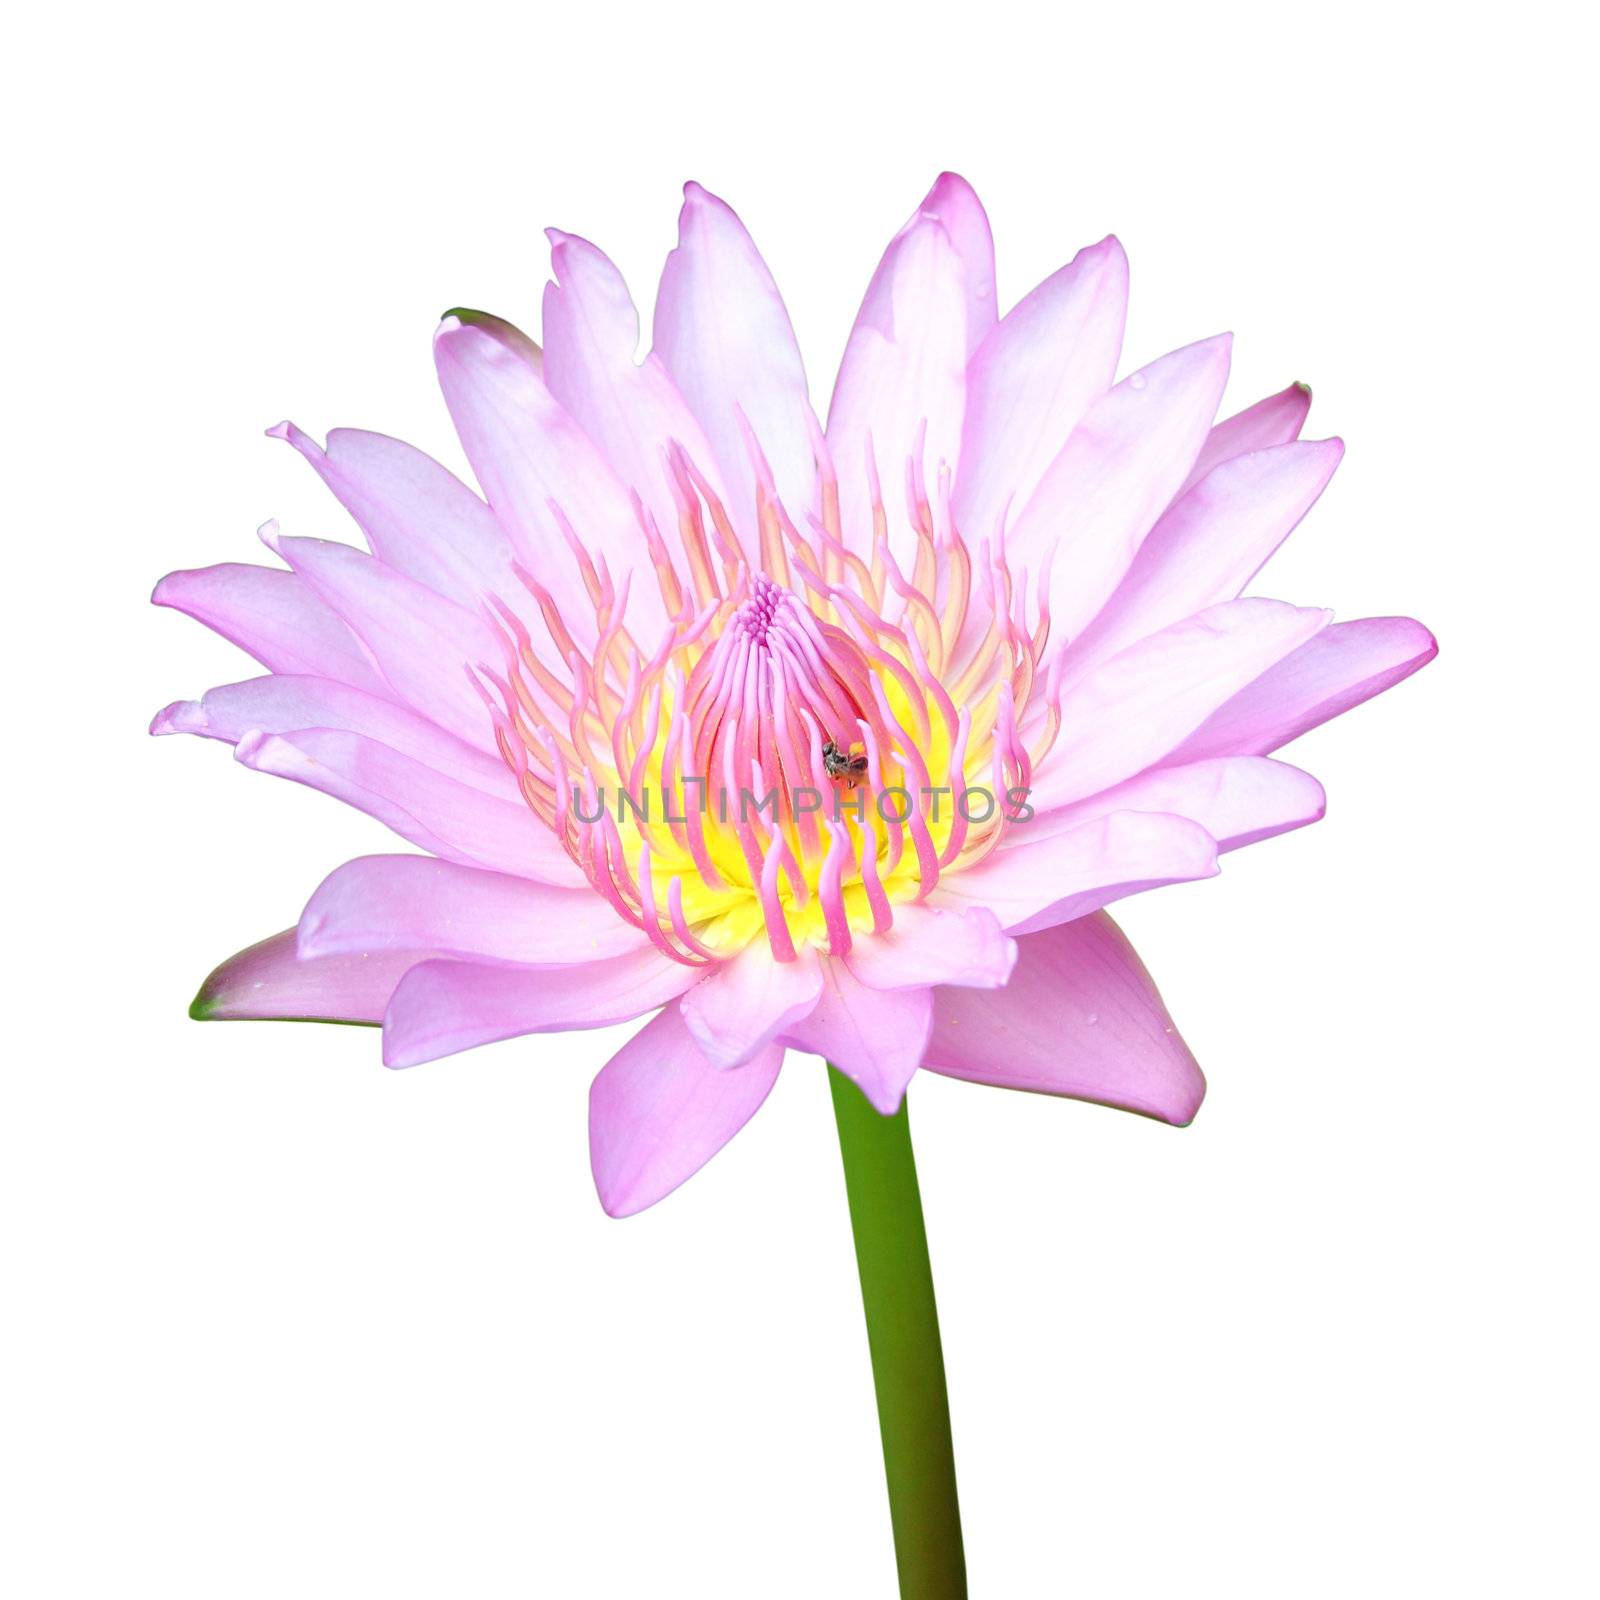 blooming pink lotus with insect on white background by geargodz